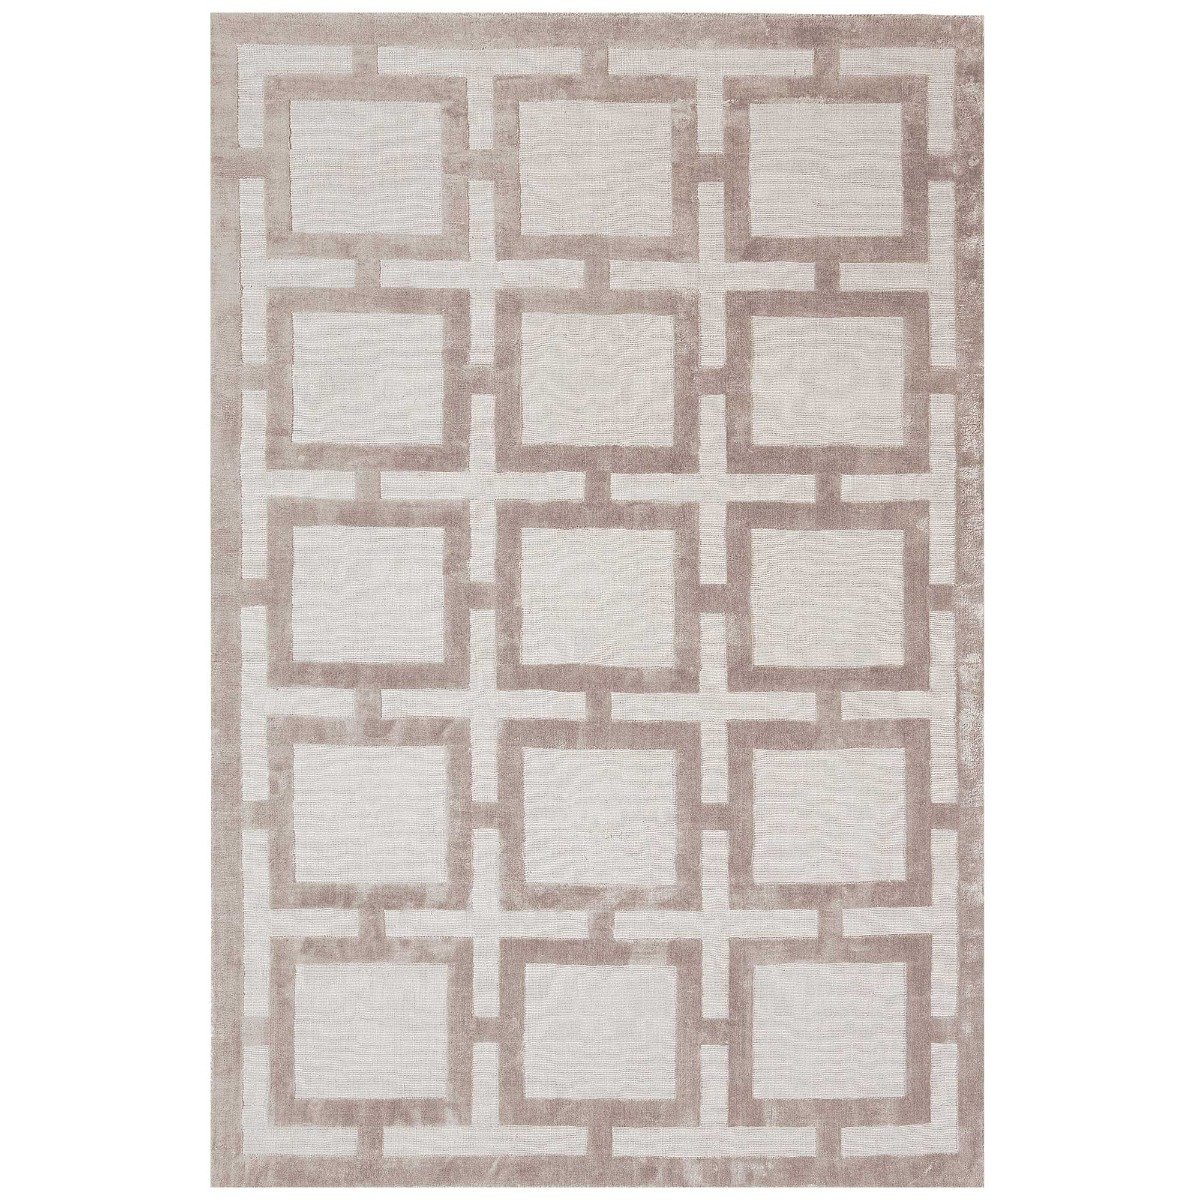 Eaton Biscuit 120x180cm Rug, Square | W120cm | Barker & Stonehouse